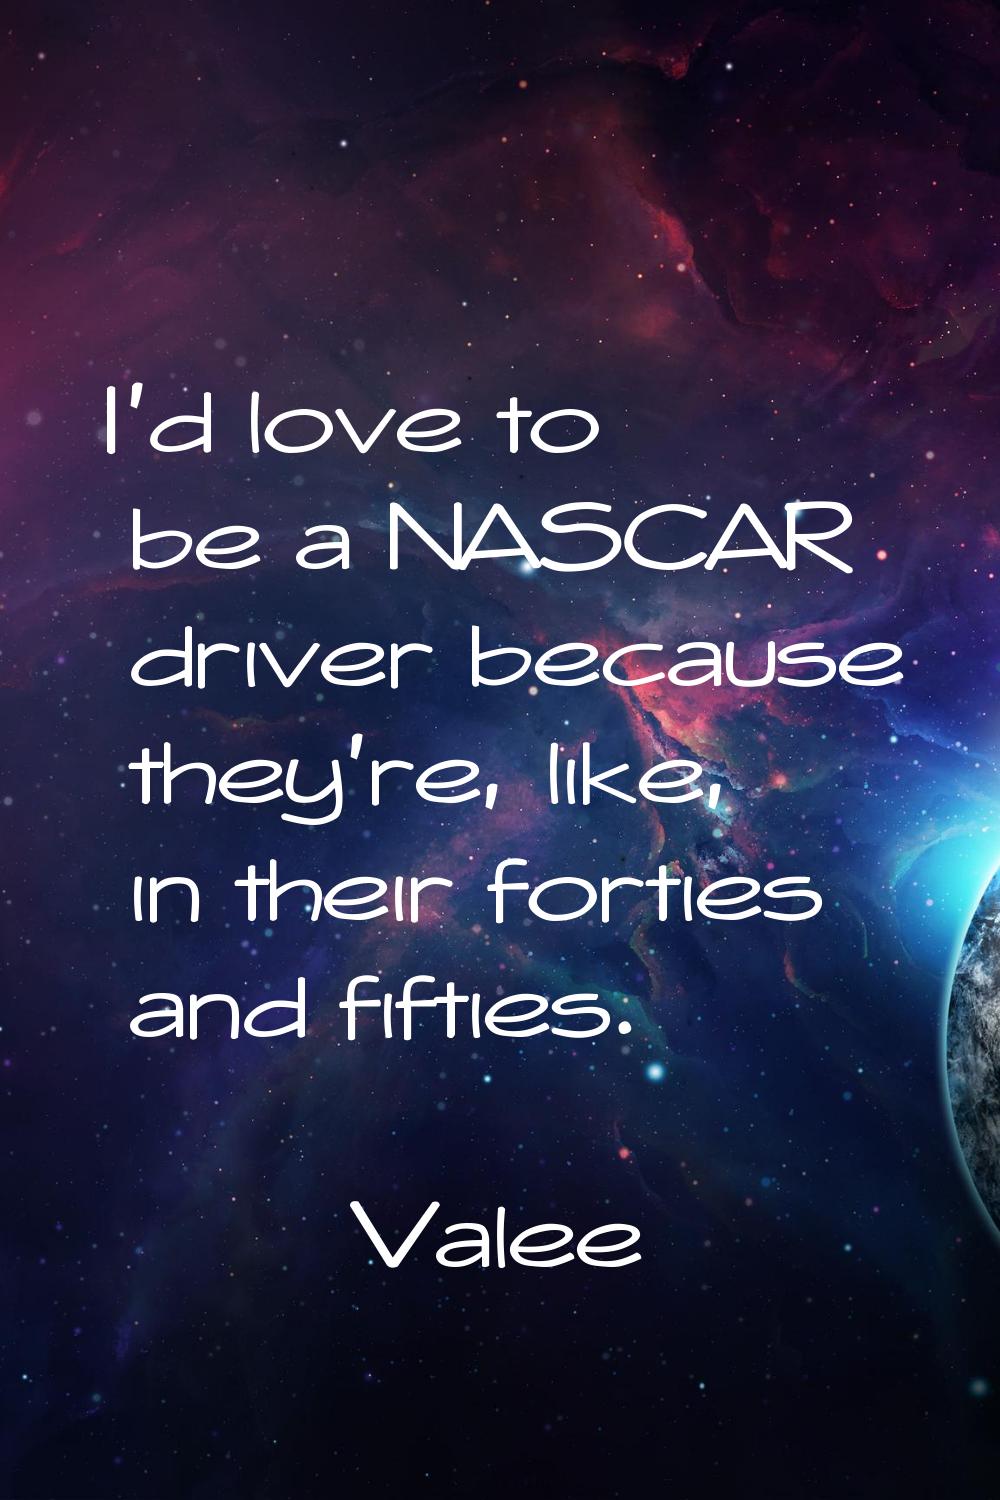 I'd love to be a NASCAR driver because they're, like, in their forties and fifties.